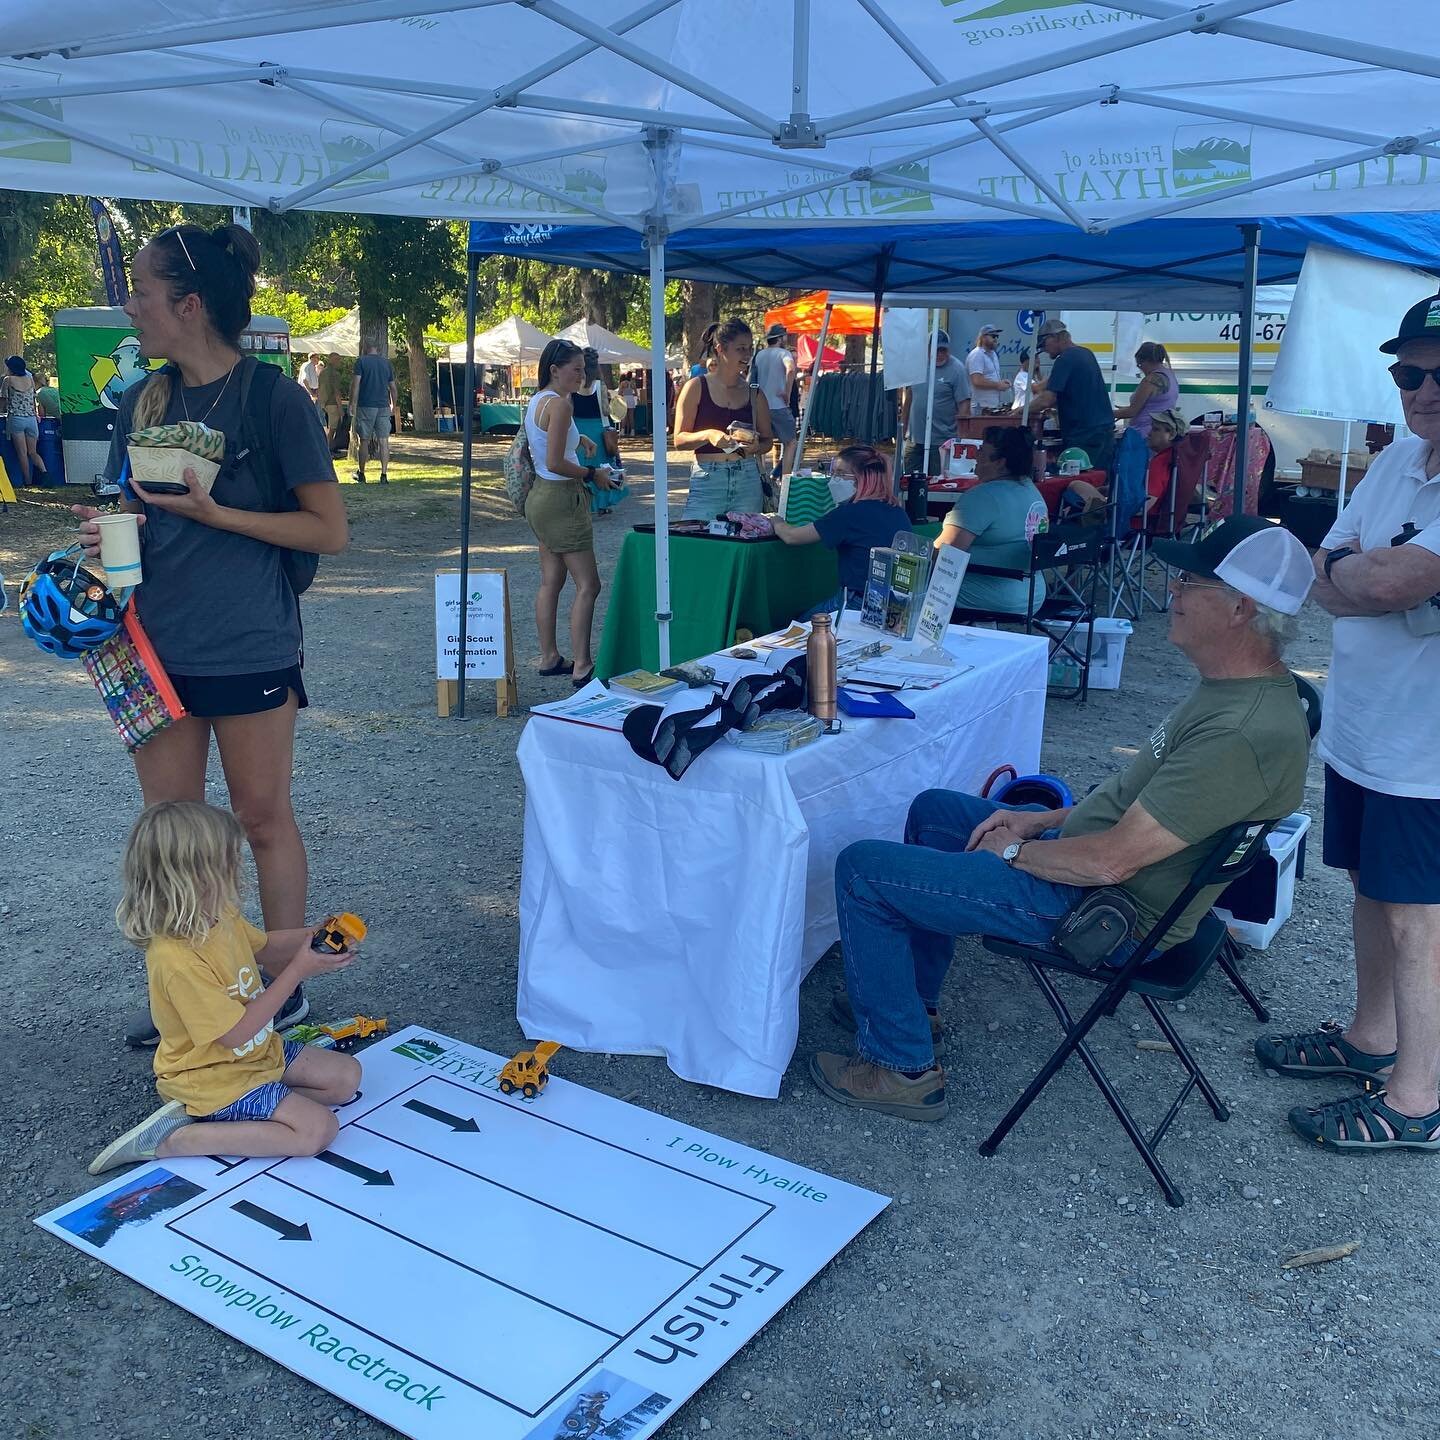 Snow plow races in this heat? Yes we do! Come say hi at the Bogert Farmers Market, learn about Hyalite Canyon, purchase a summer map and race plows on our racetrack.